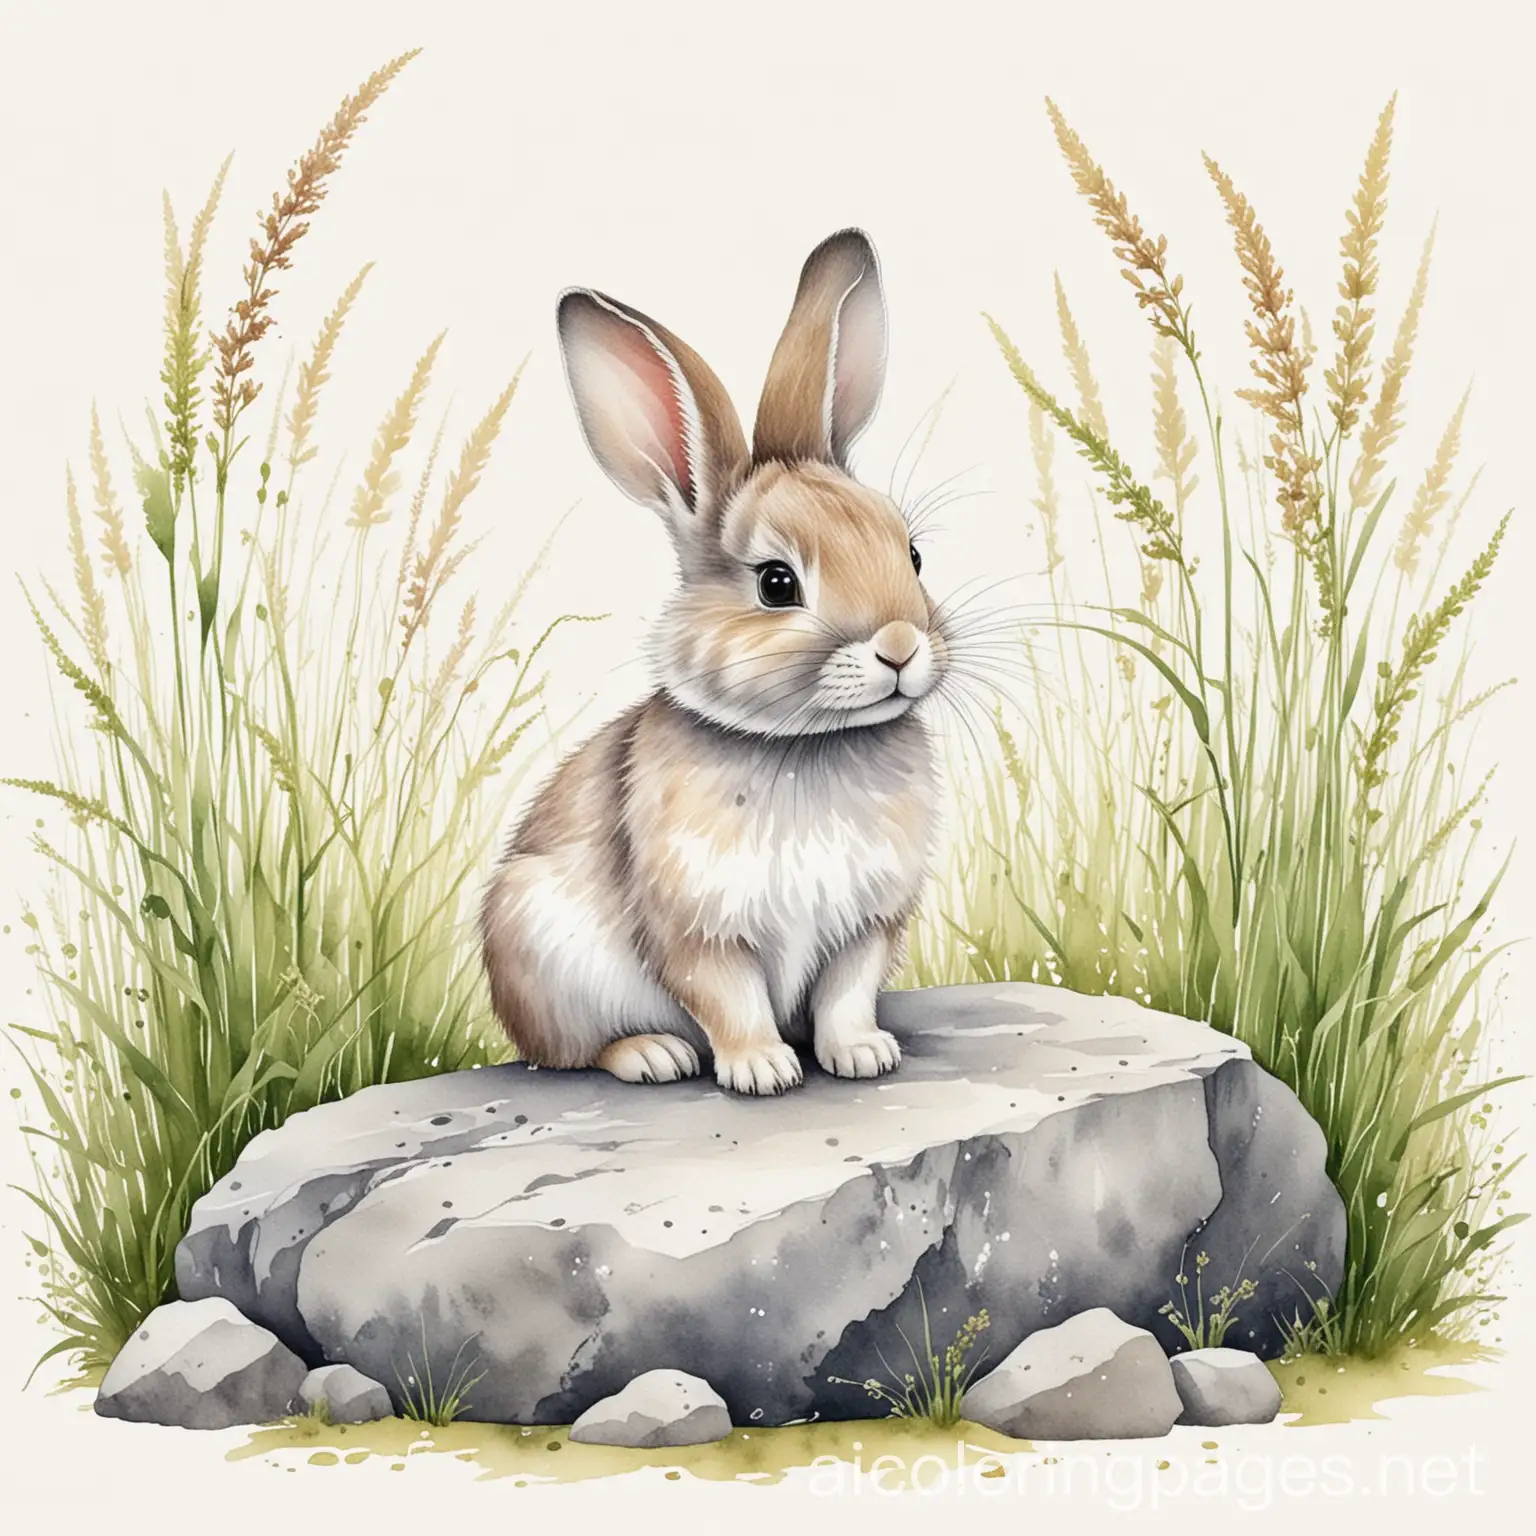 cute small rabbit siting on a small rock surrounded by grasses watercolour illustration, Coloring Page, black and white, line art, white background, Simplicity, Ample White Space. The background of the coloring page is plain white to make it easy for young children to color within the lines. The outlines of all the subjects are easy to distinguish, making it simple for kids to color without too much difficulty